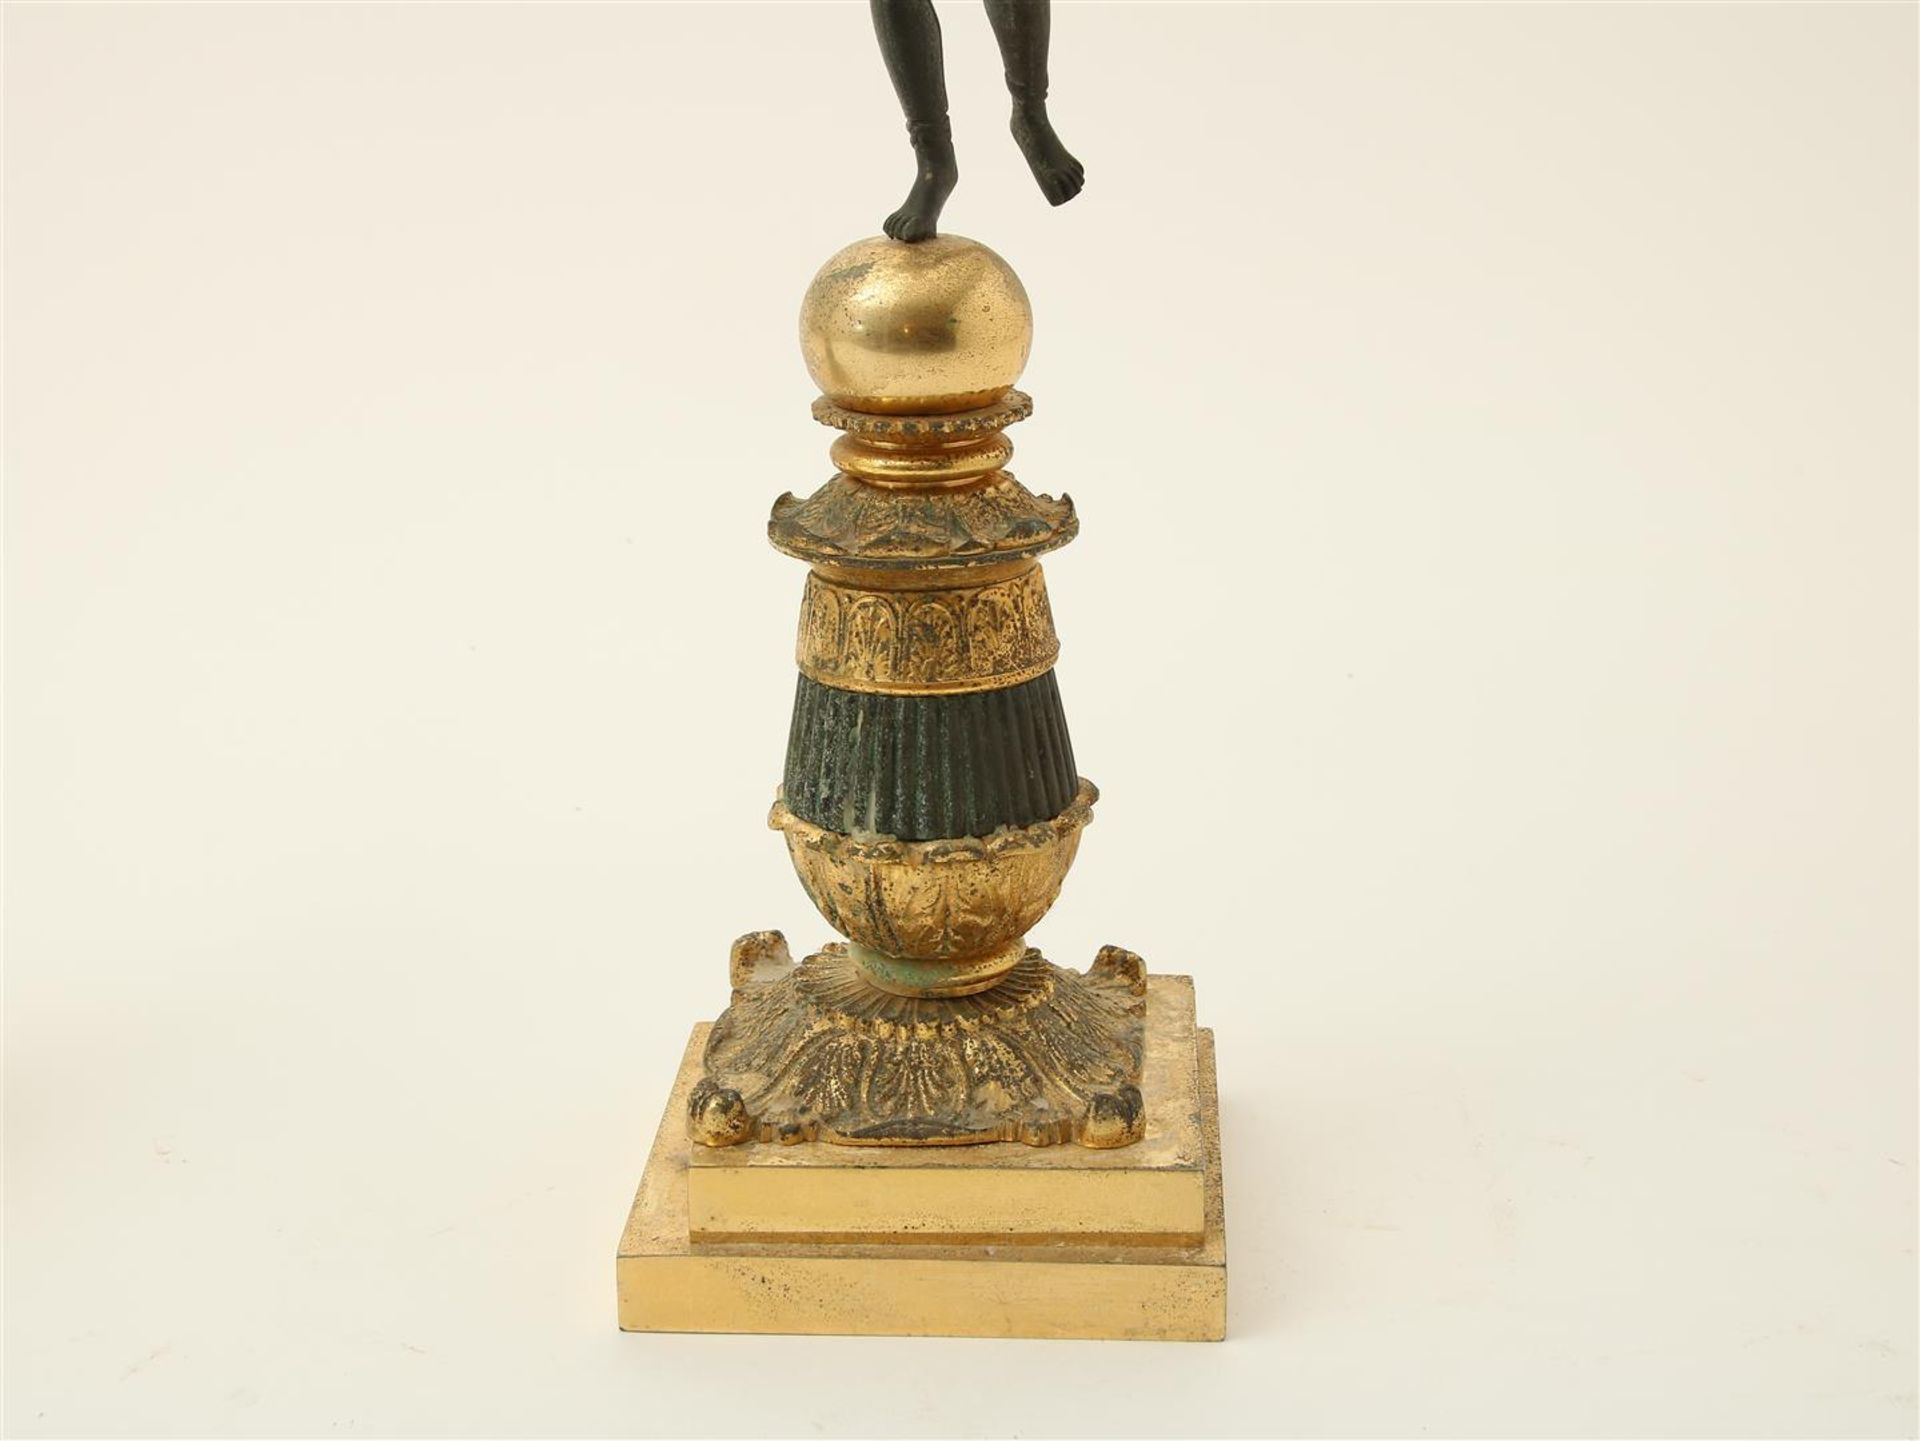 Set of bronze Empire style 5 light candlesticks carried by man and woman, France 20th century, - Image 6 of 6